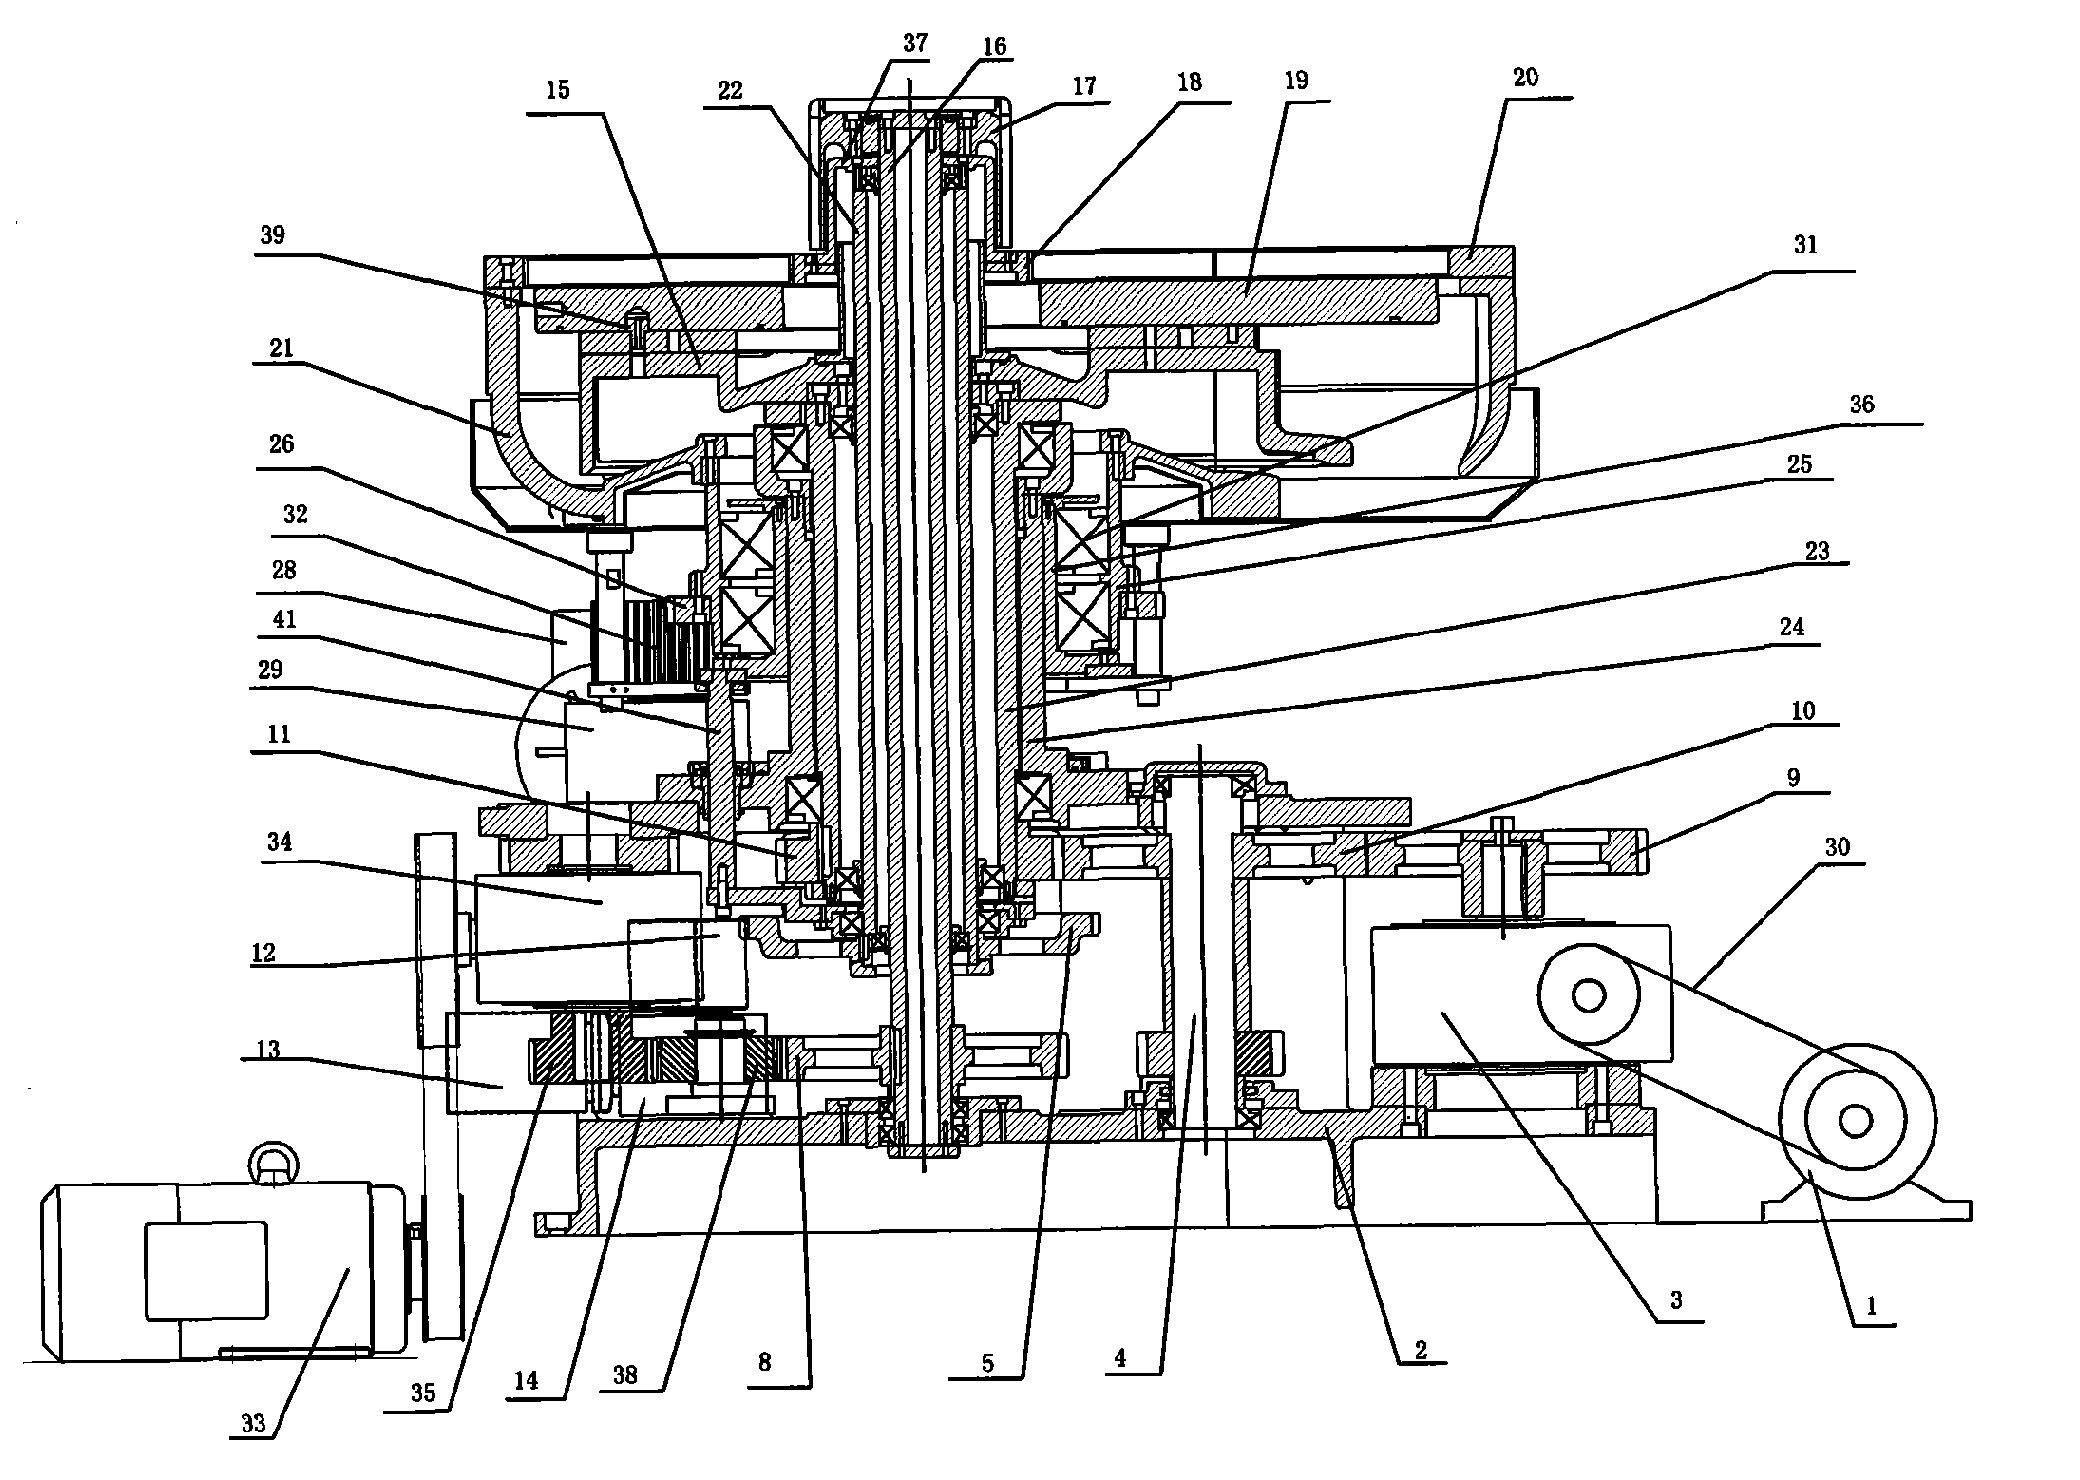 Mainshaft transmission system of numerically-controlled precise grinding polisher